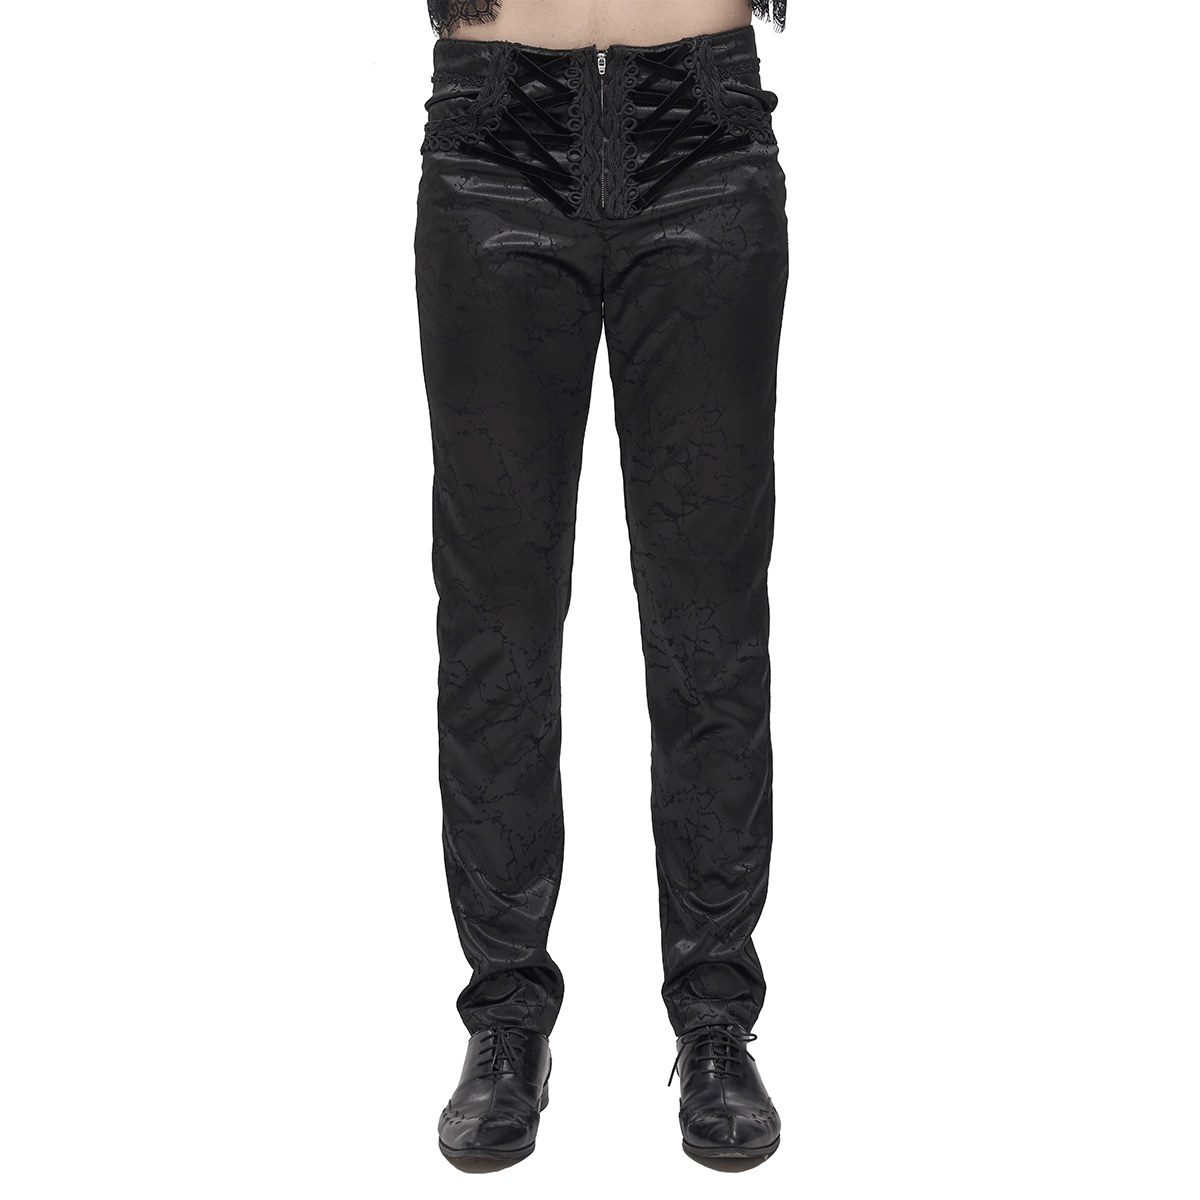 Black Men's Gothic Zipper Front Pants with Lace-Up And Lace / Vintage Long Straight Fit Trousers - HARD'N'HEAVY